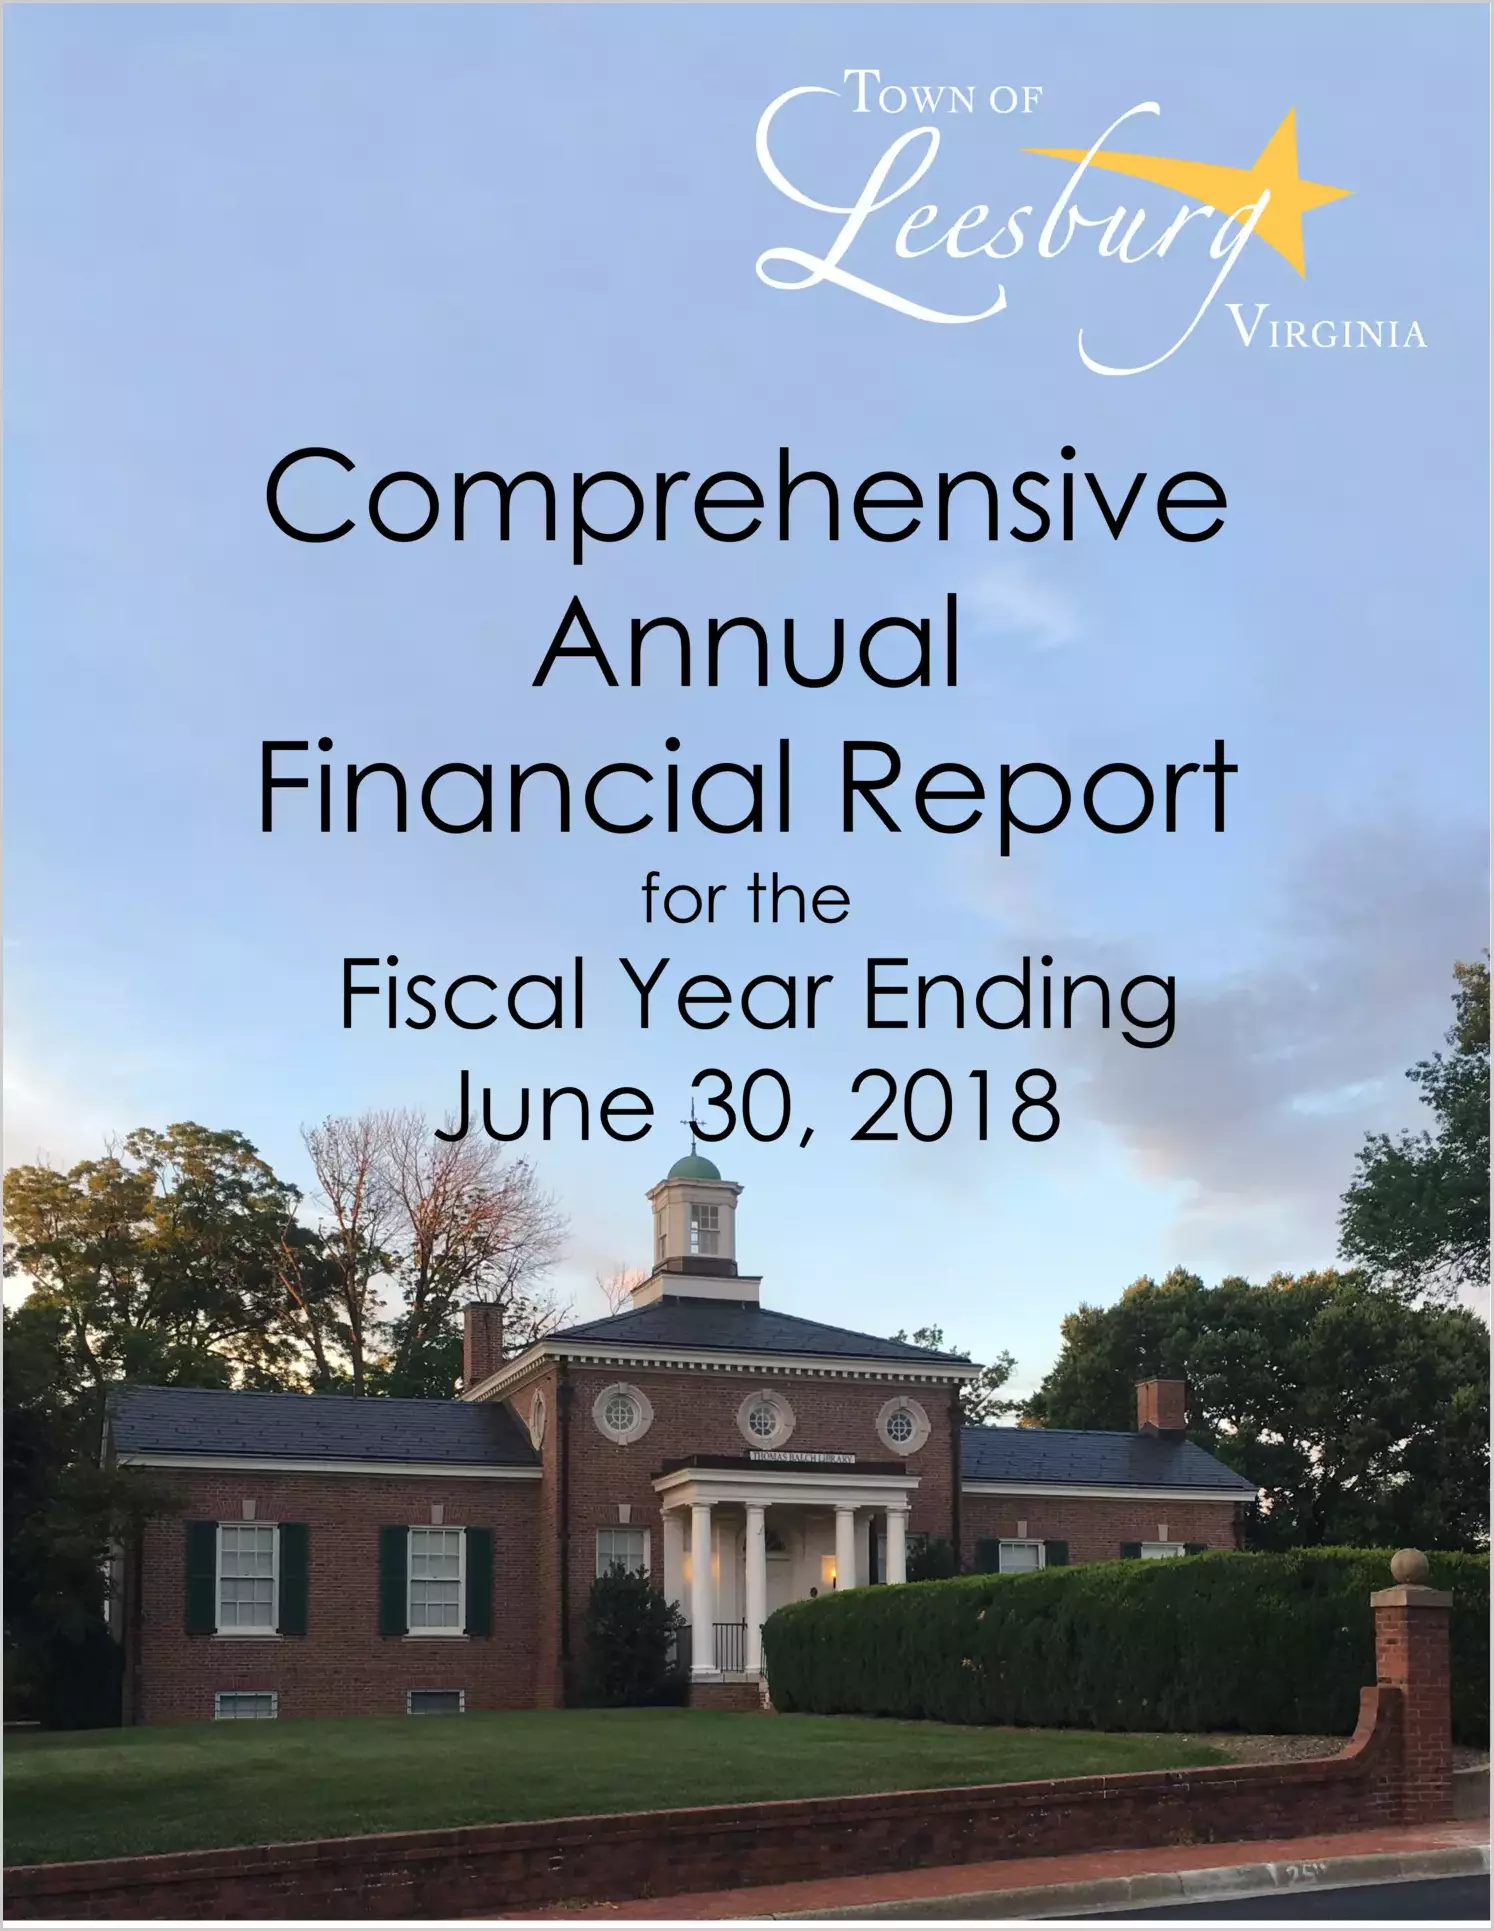 2018 Annual Financial Report for Town of Leesburg